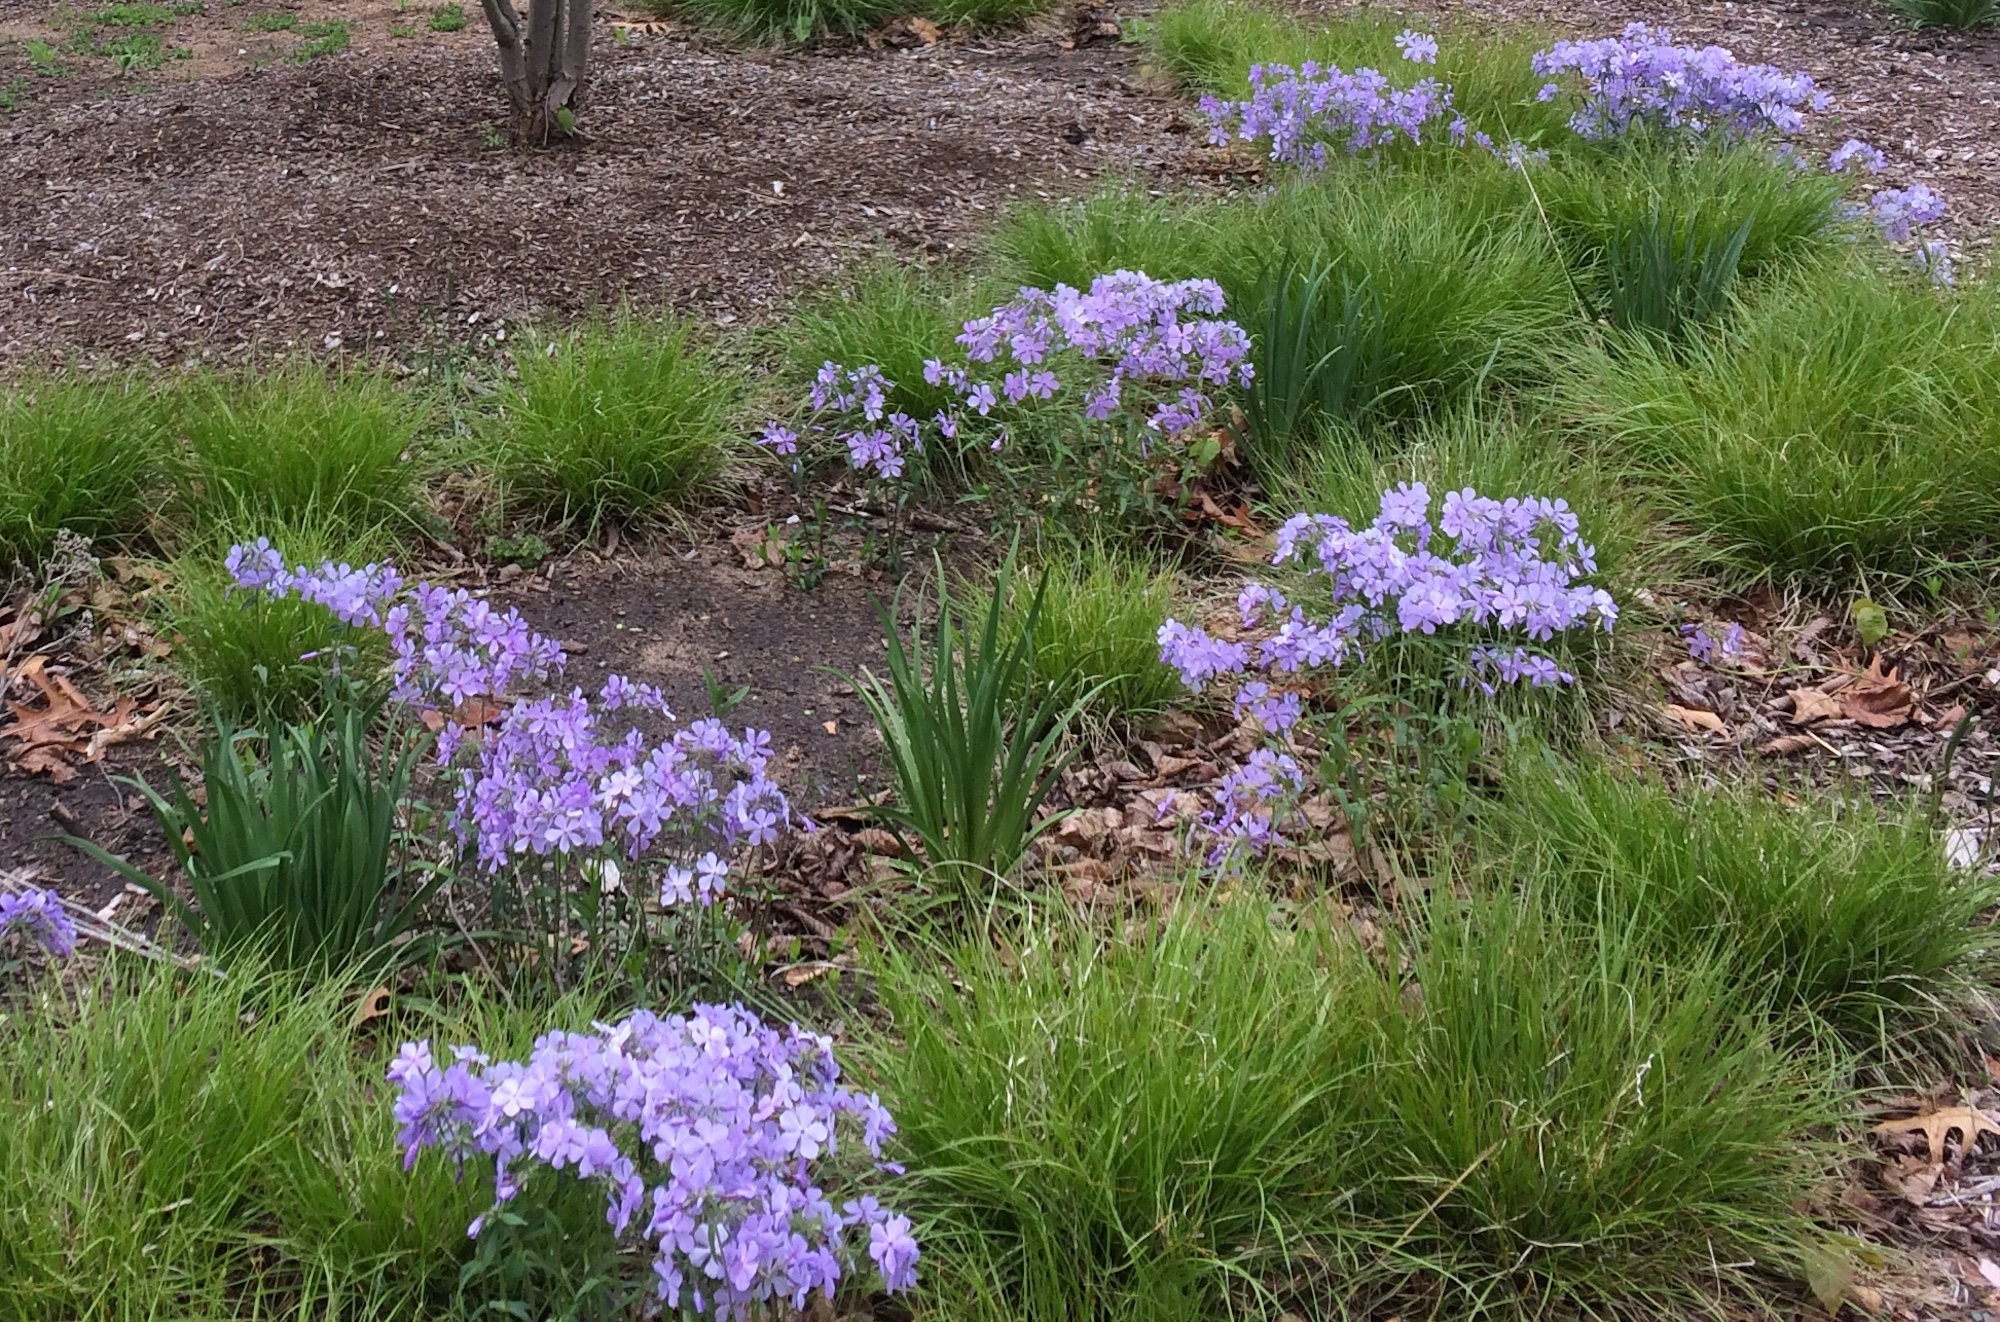 Wild blue phlox and Pennsylvania sedge in early May